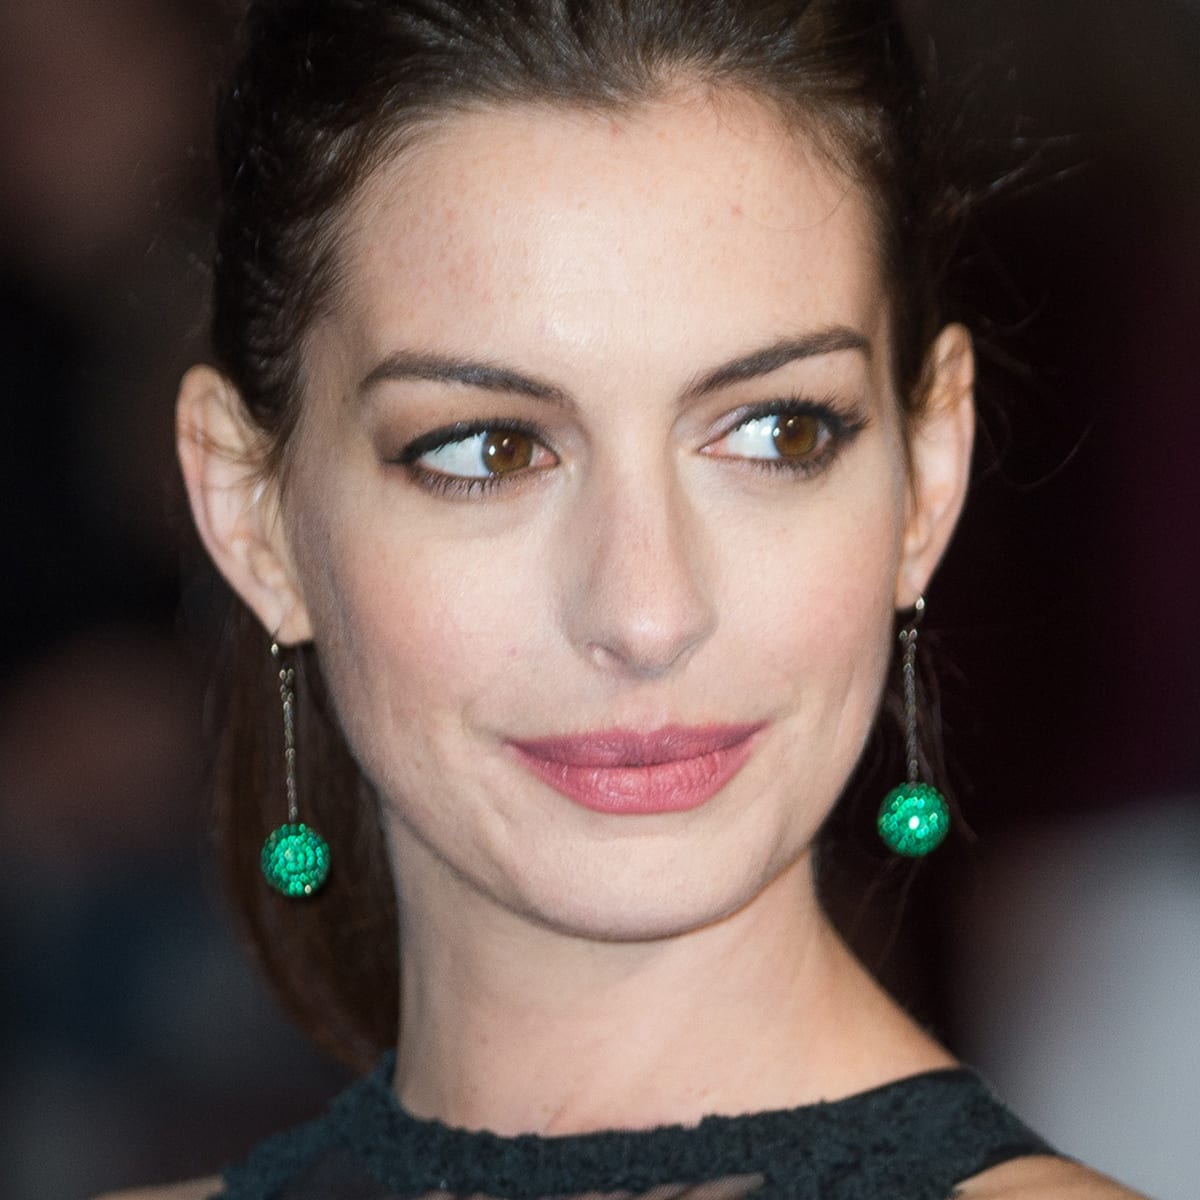 Anne Hathaway Outsmarted the Paparazzi, But Is Consent Really All That  Matters? - Verily